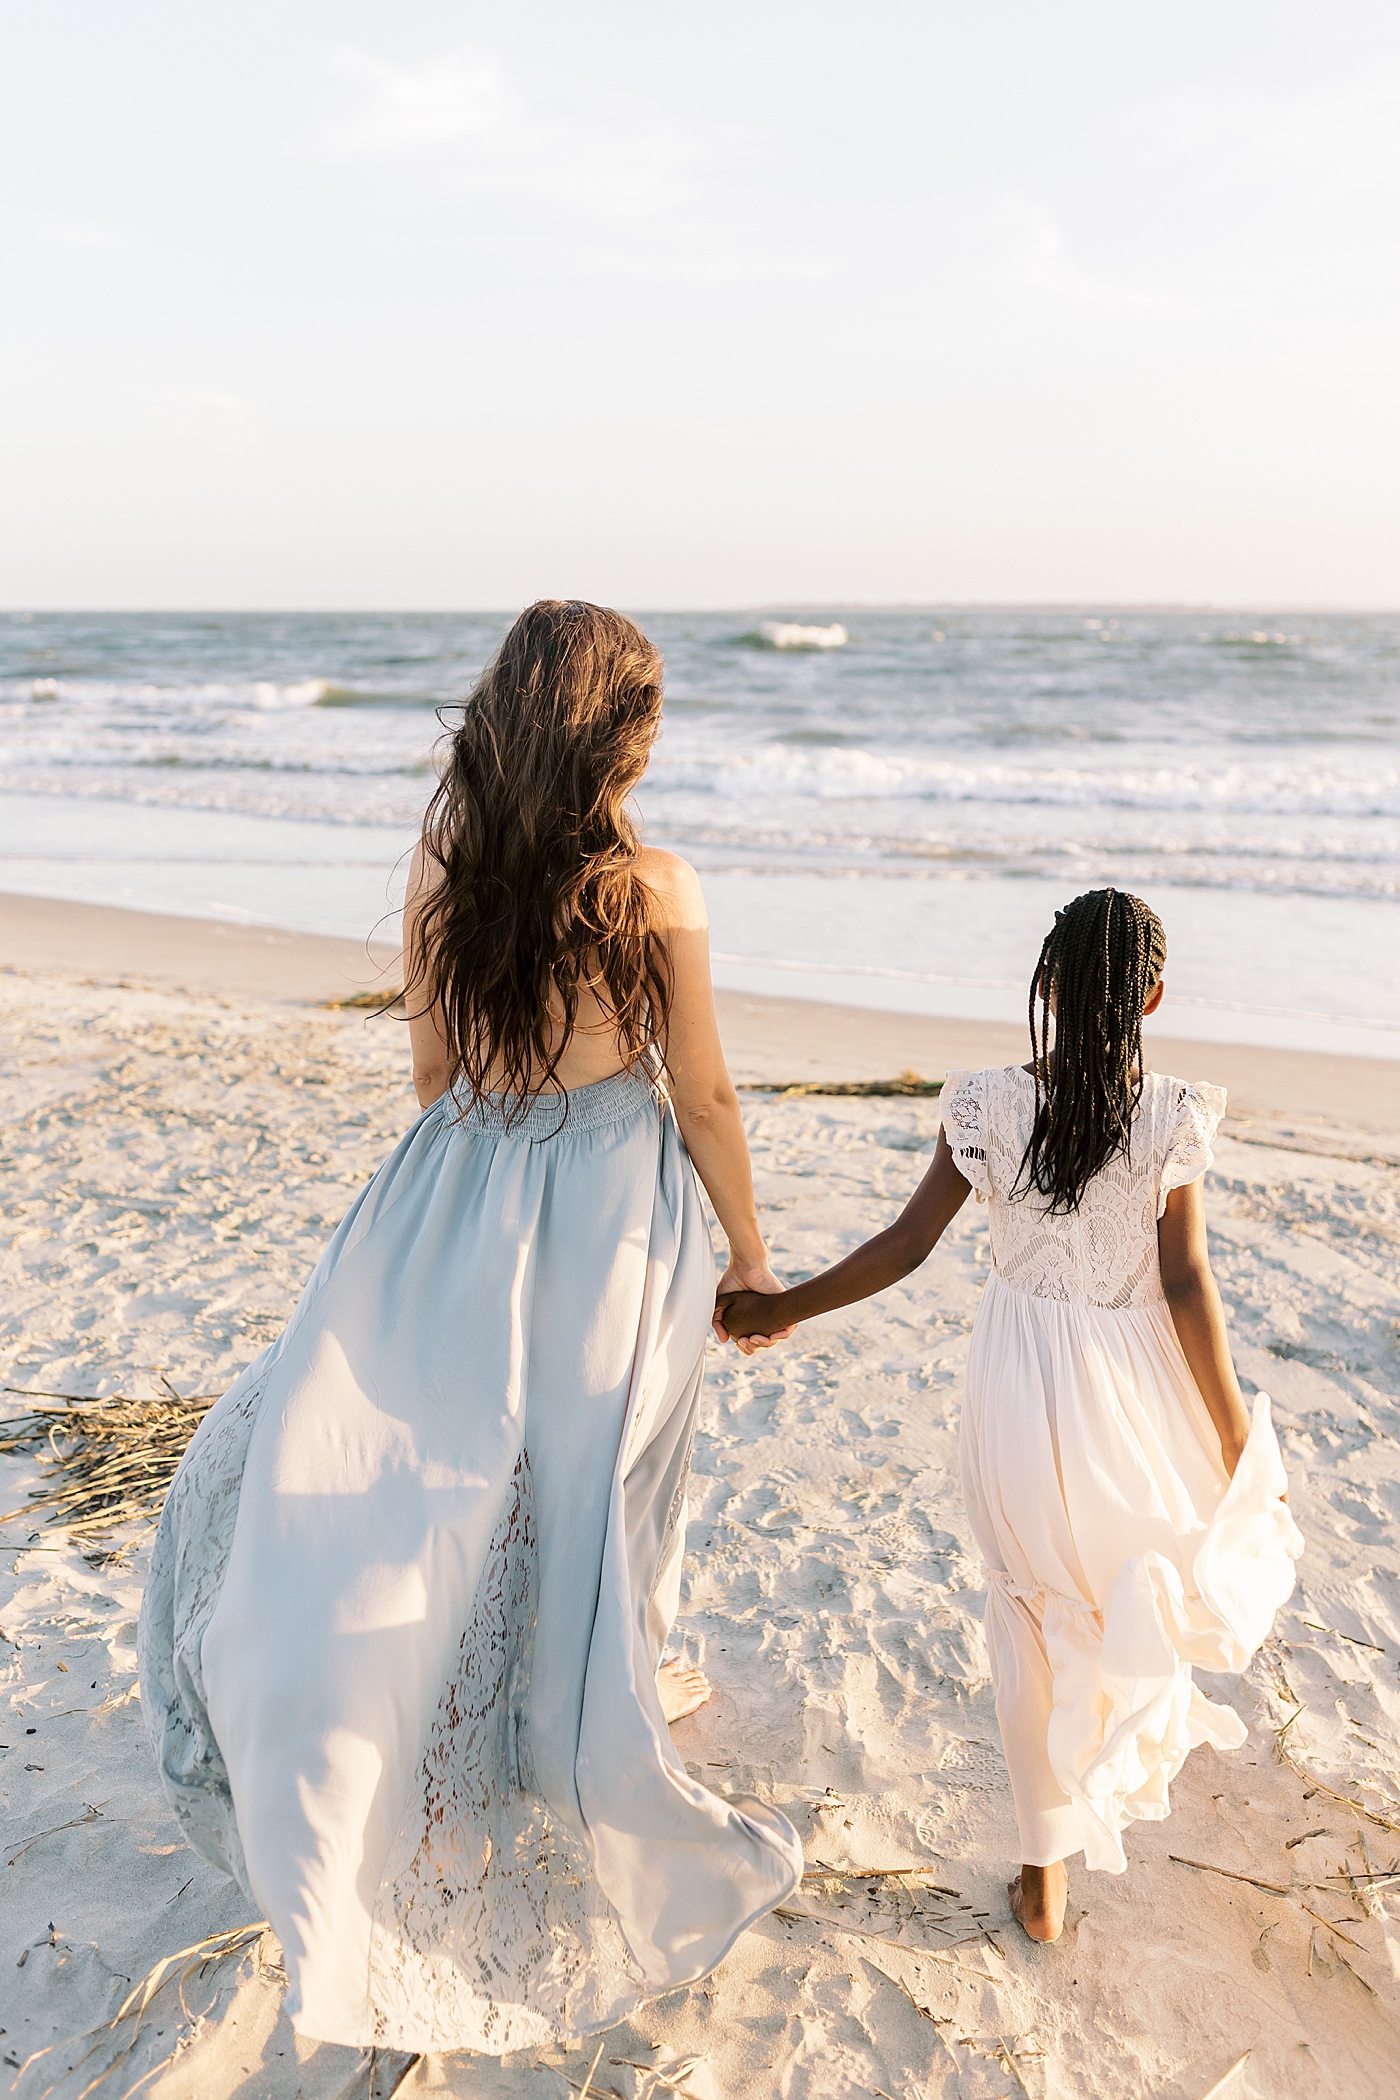 Mom and daughter walking on the beach | Image by Caitlyn Motycka